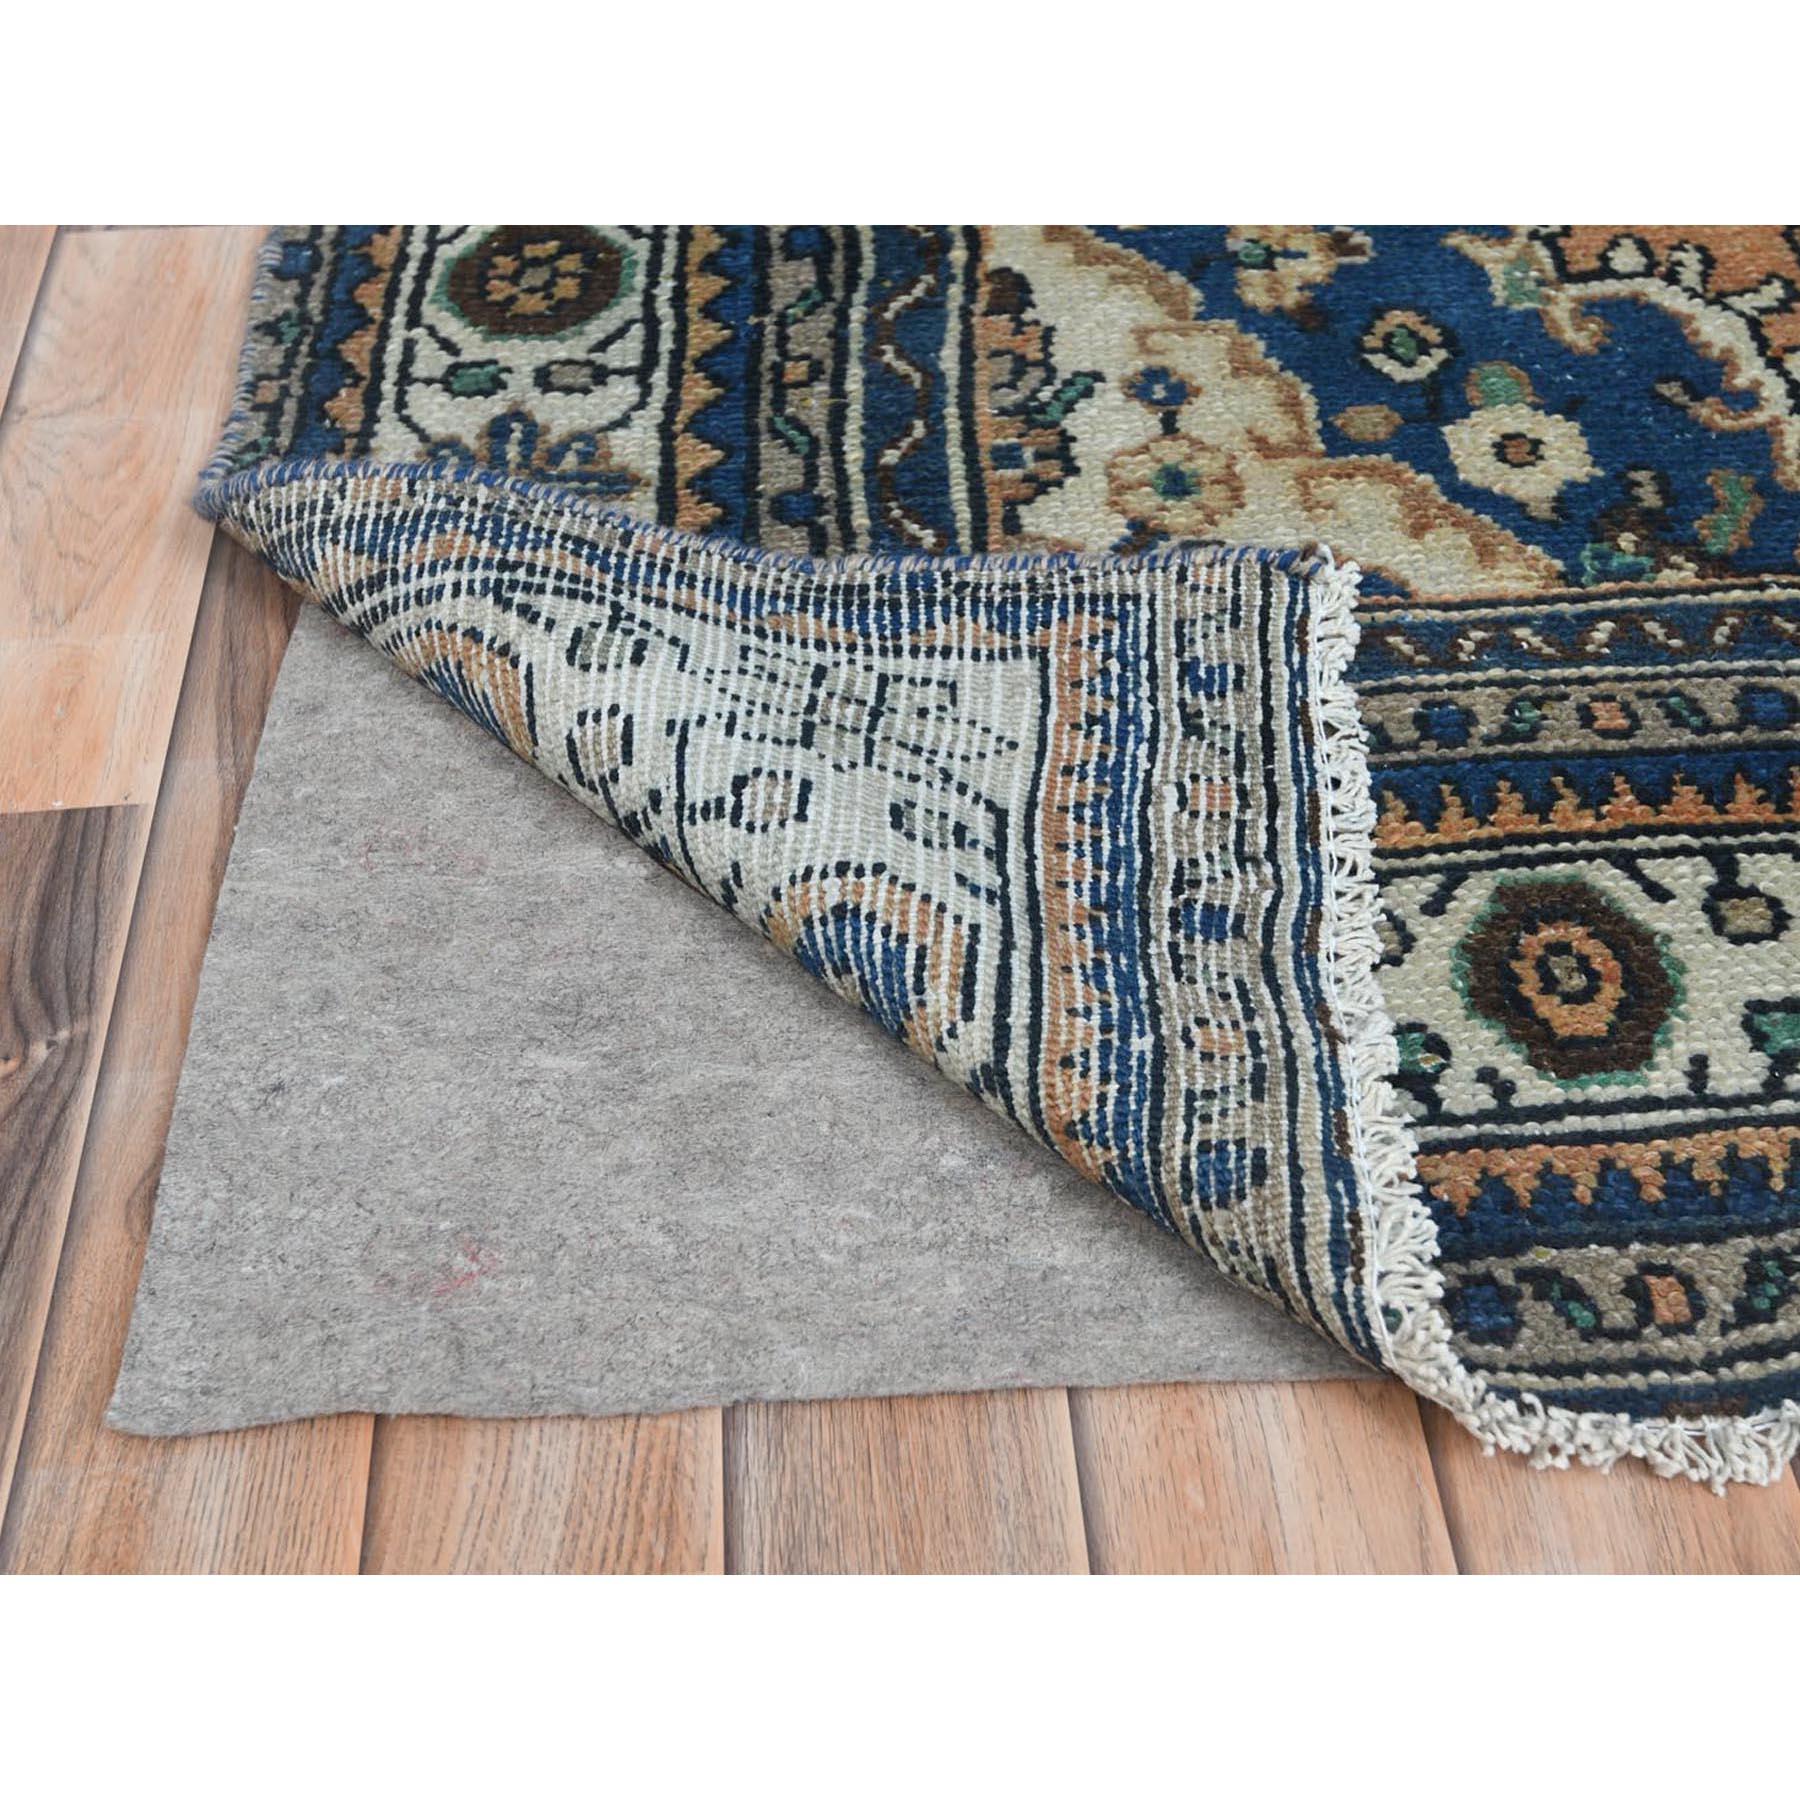 Apricot Color, Worn Wool Hand Knotted, Vintage Persian Bibikabad, Distressed Rug In Good Condition For Sale In Carlstadt, NJ